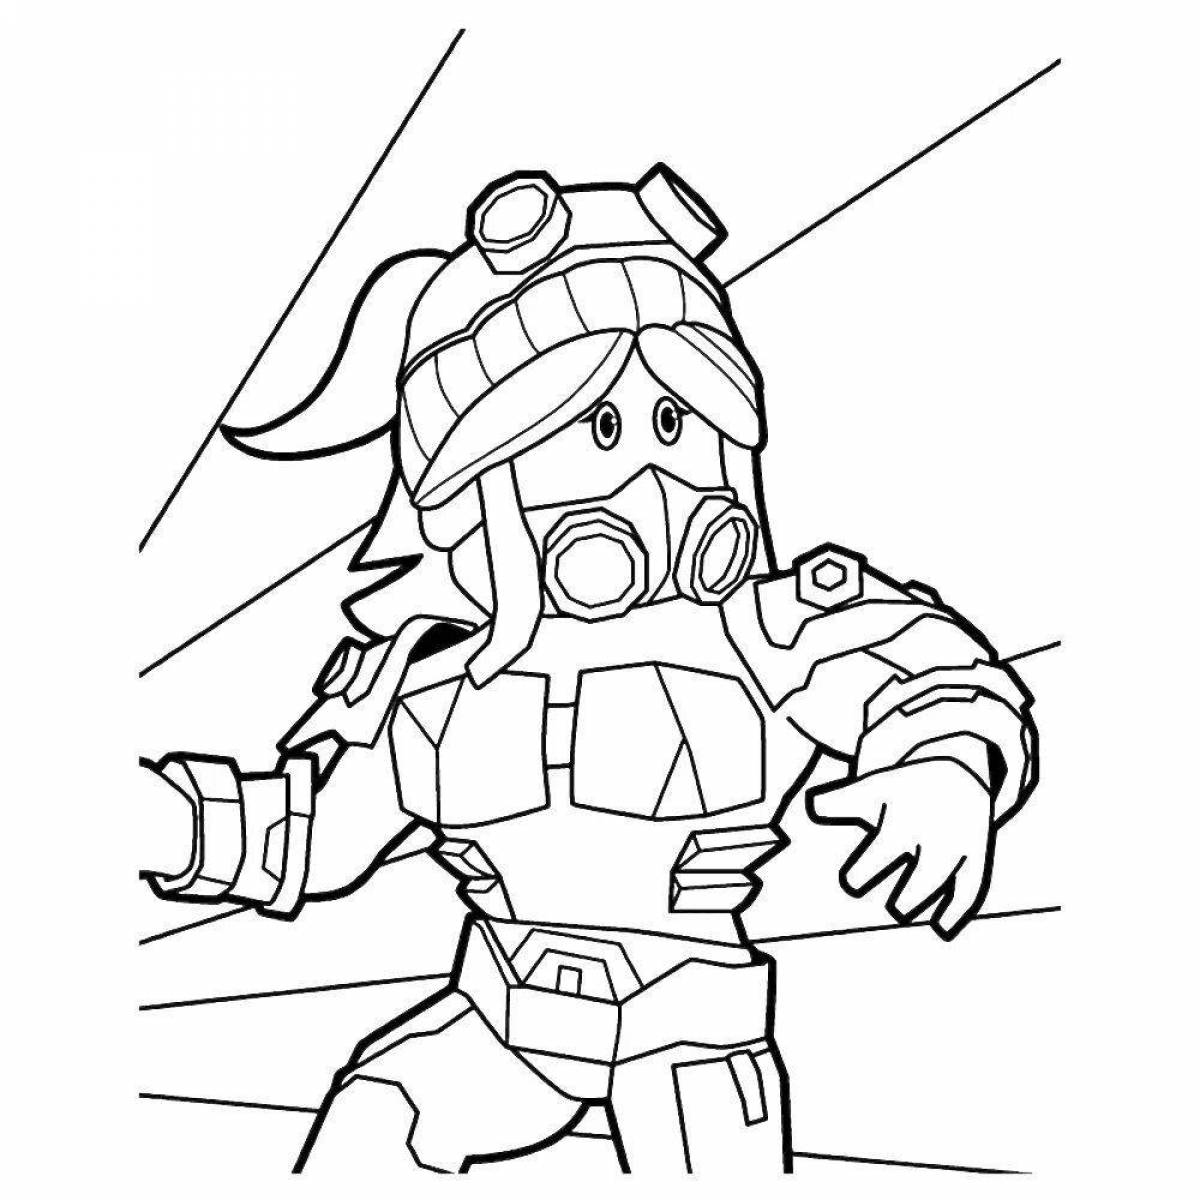 Robloxers live coloring pages